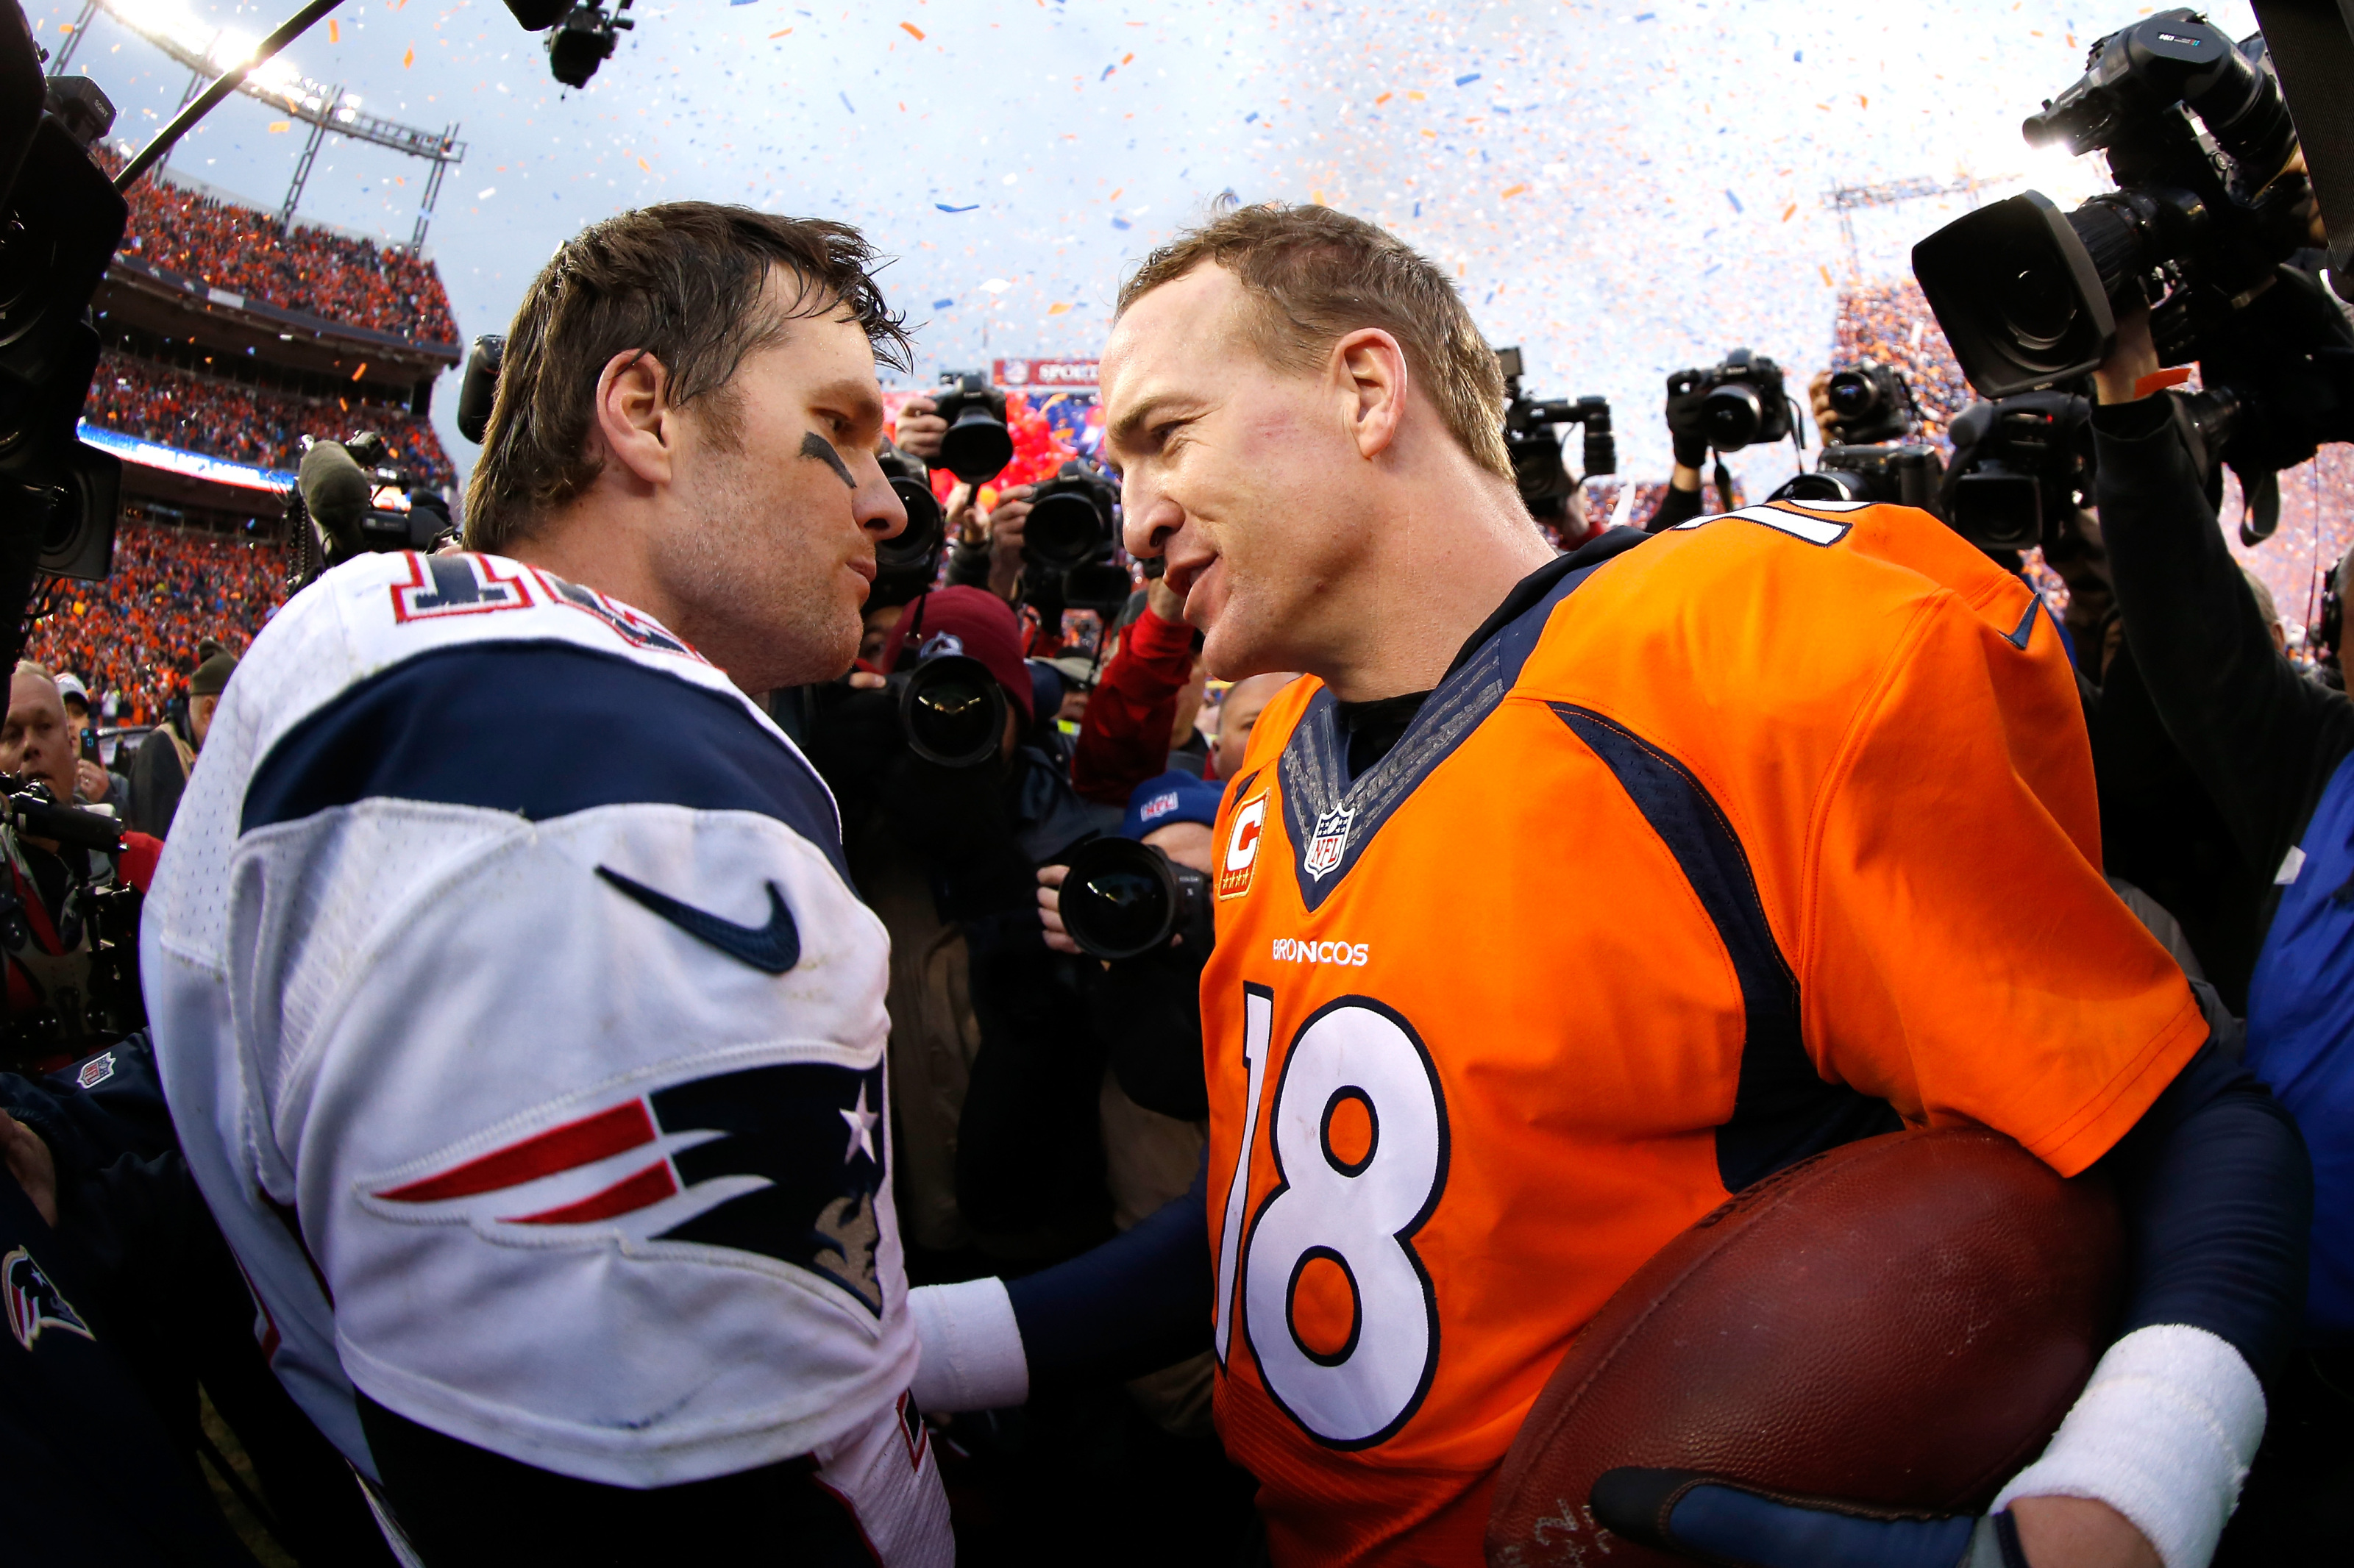 Tennessee football: Tom Brady retires behind Peyton Manning in key stats